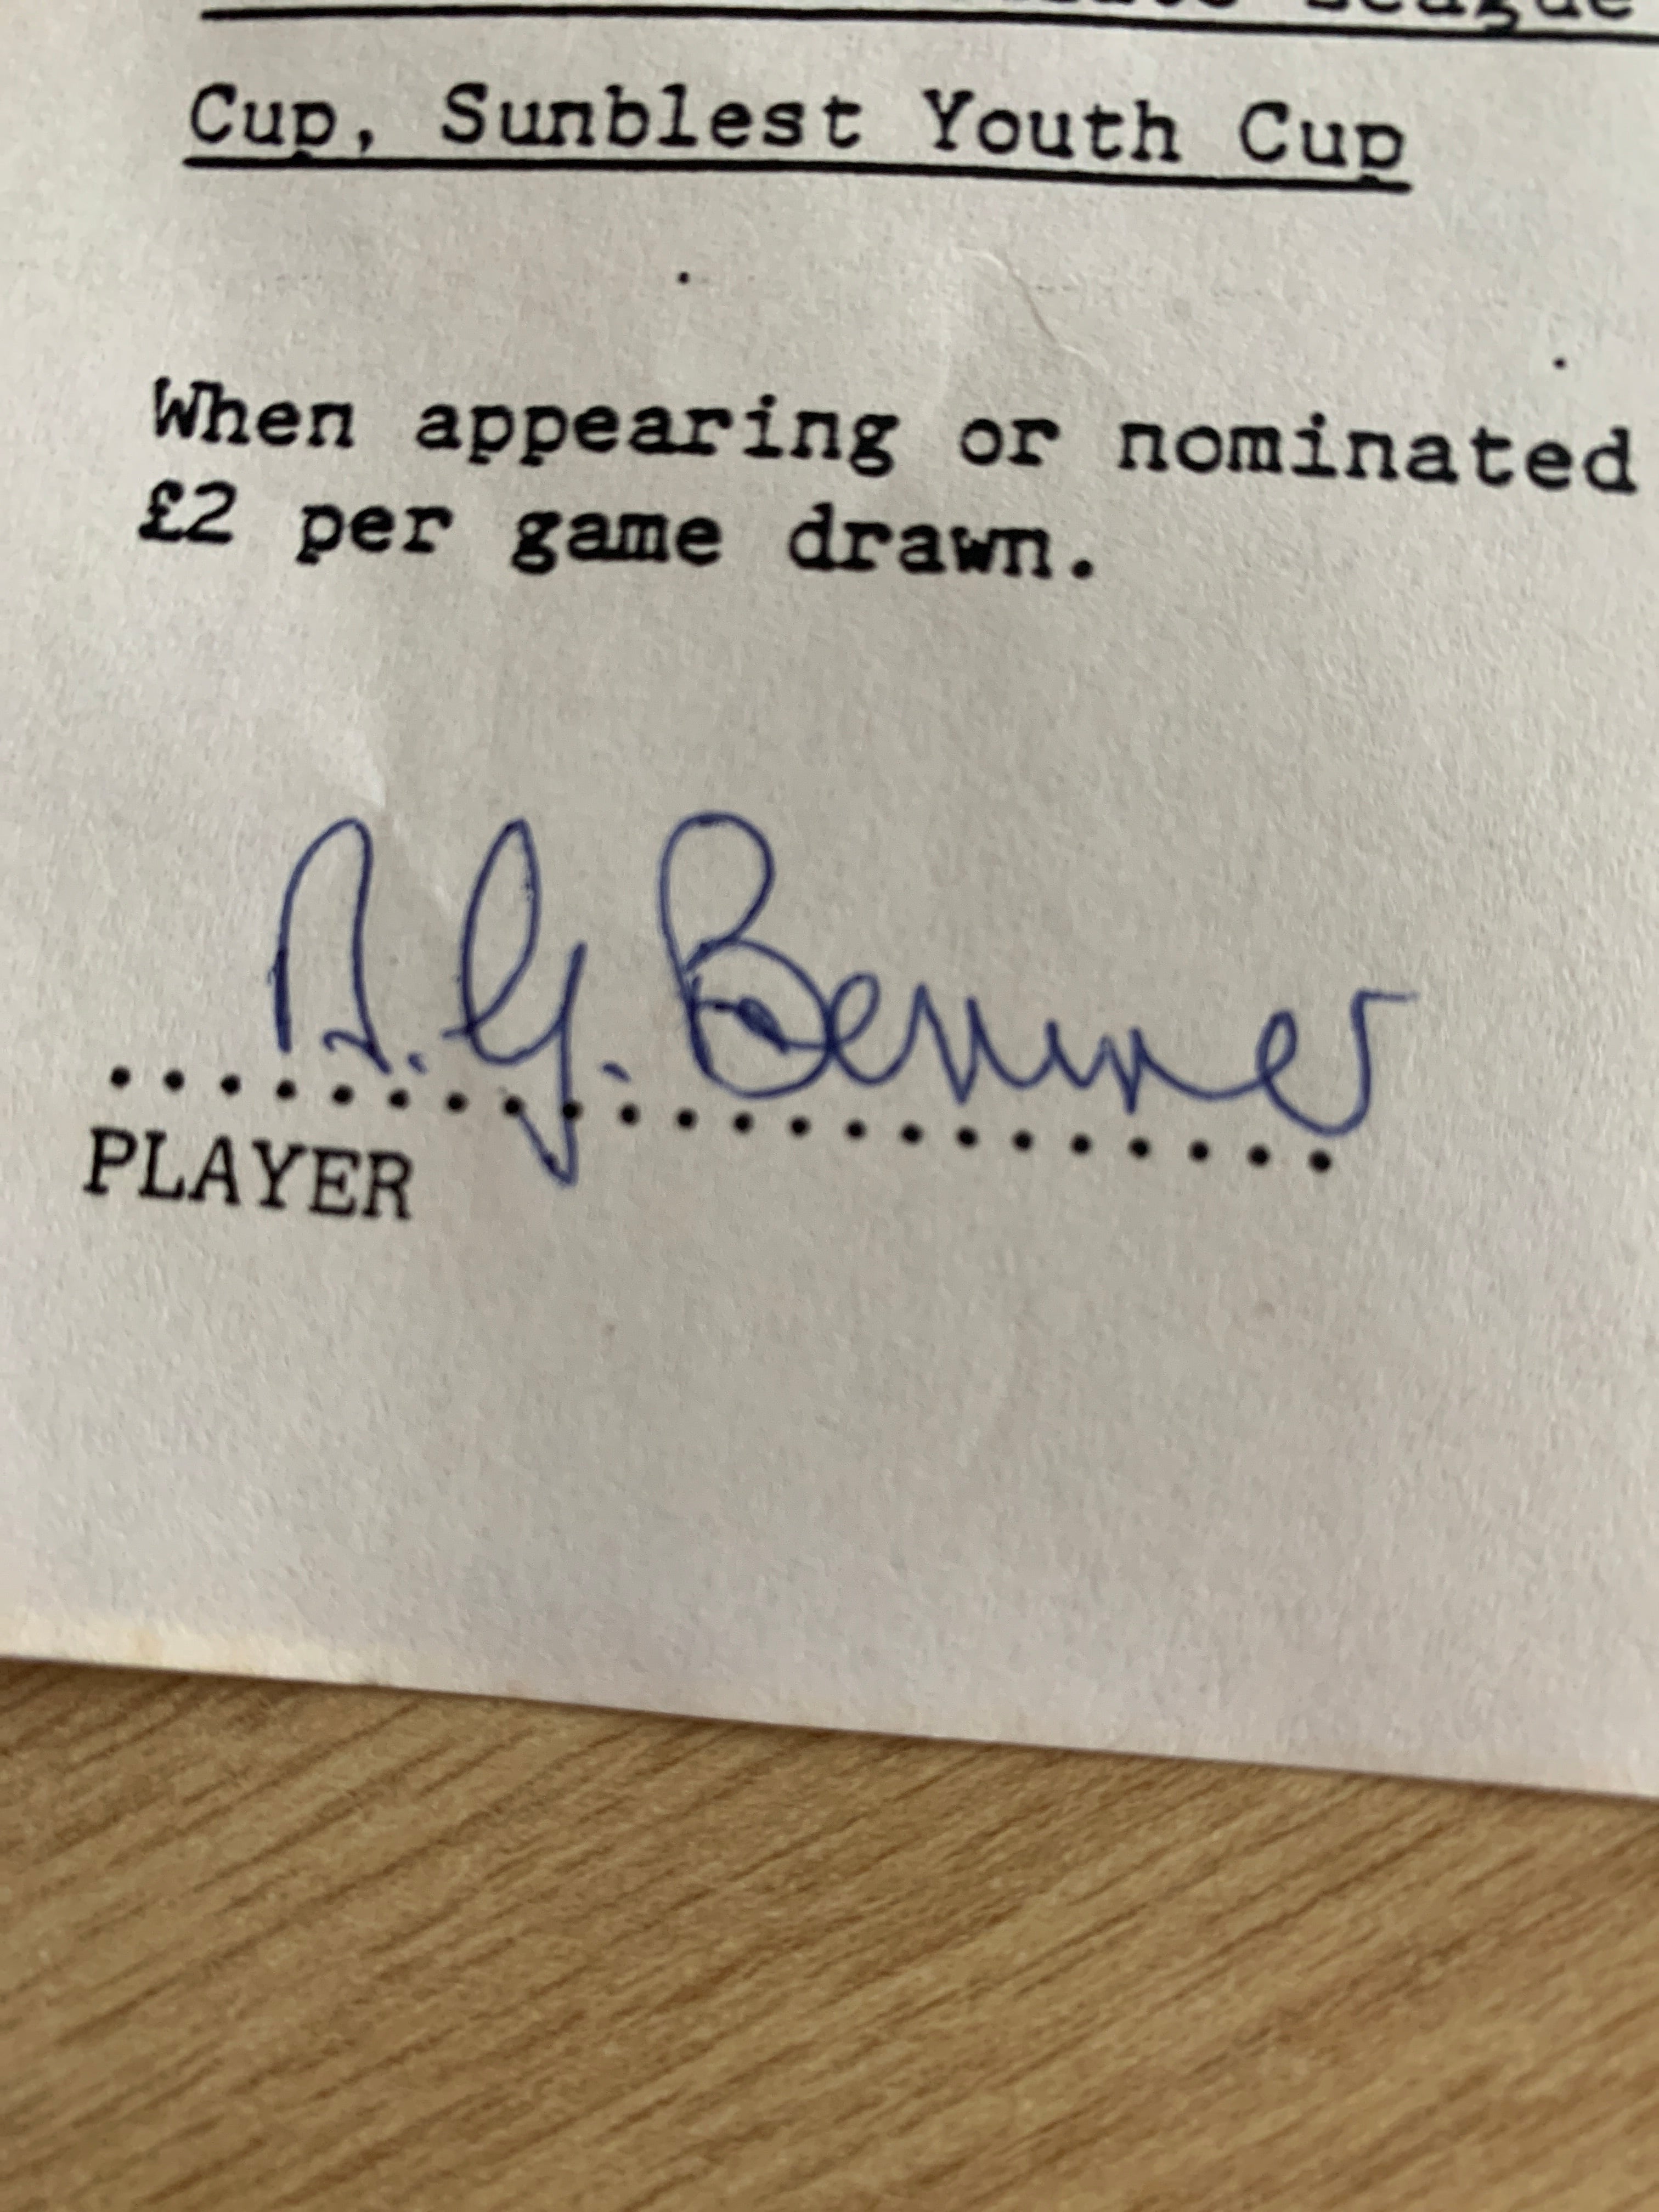 Football League Contract & Birmingham City FC Schedule of Playing Incentives - Des Bremner